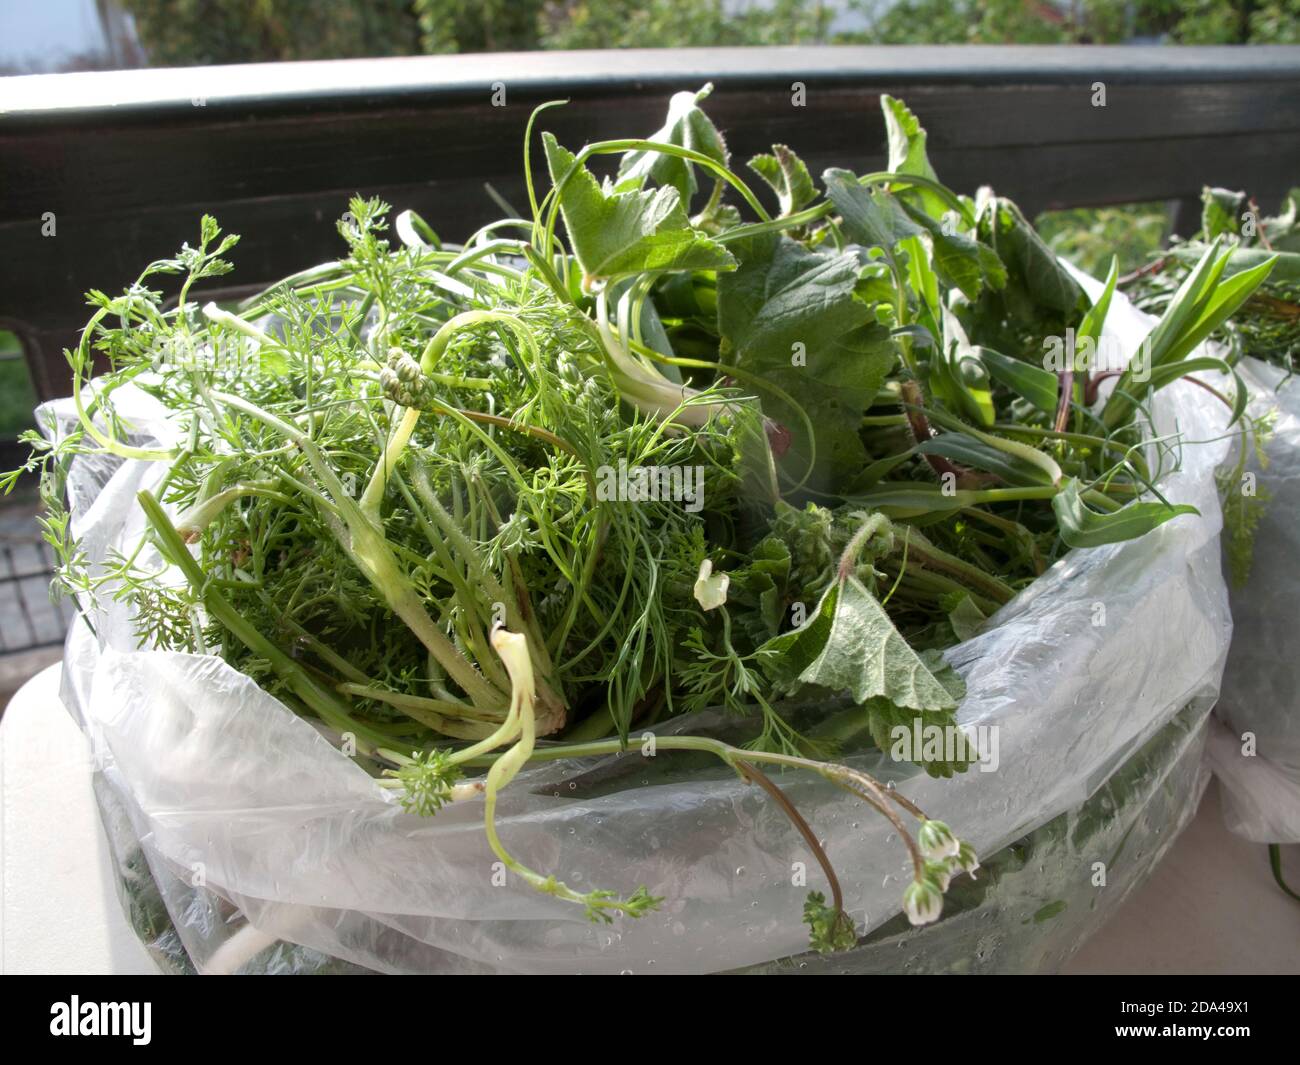 Wild greens sold at a Turkish rural market in spring including a variety of plants: wild onions , mallow, campion, and carrot family Stock Photo